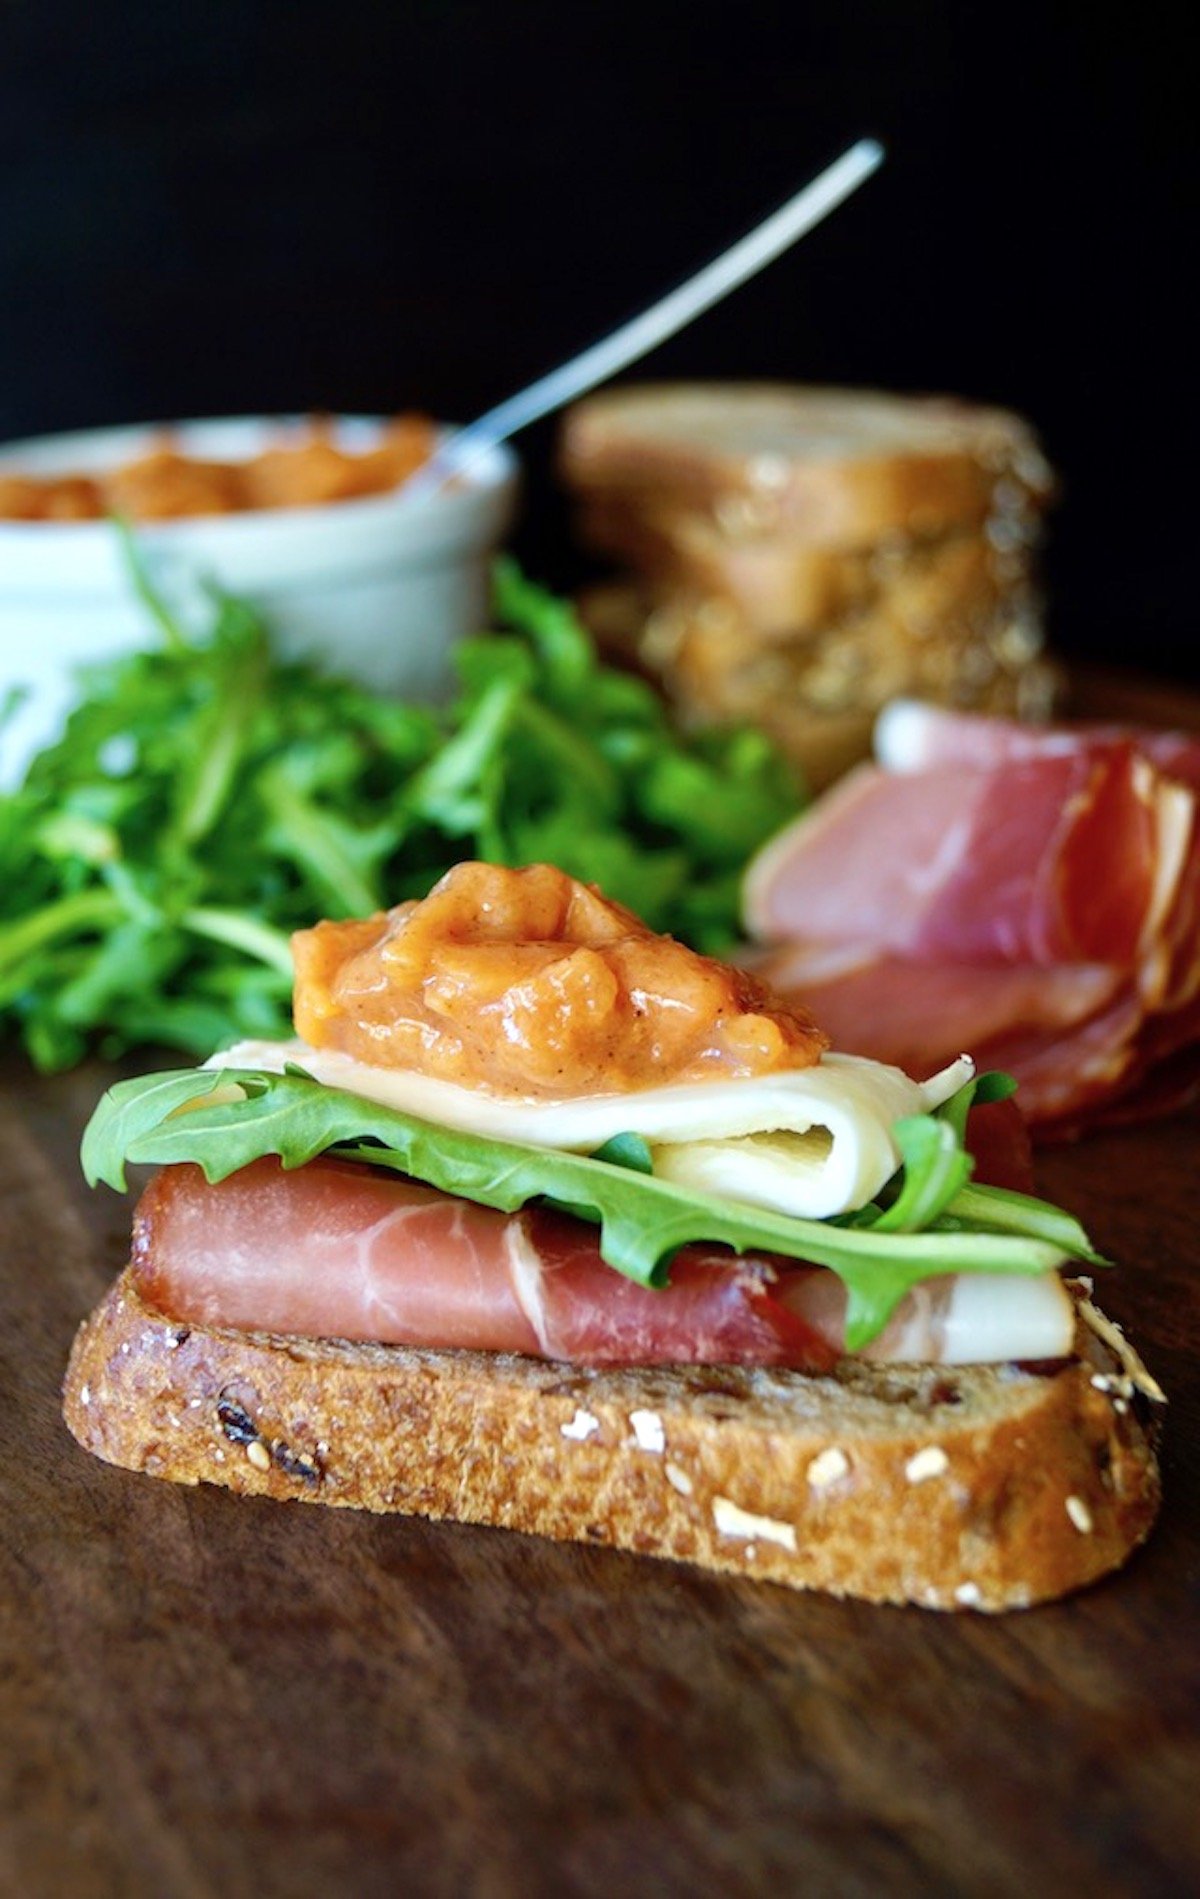 Open faced sandwich with Spicy Persimmon Preserves in a white bolw surrounded by meats, cheeses and bread slices.